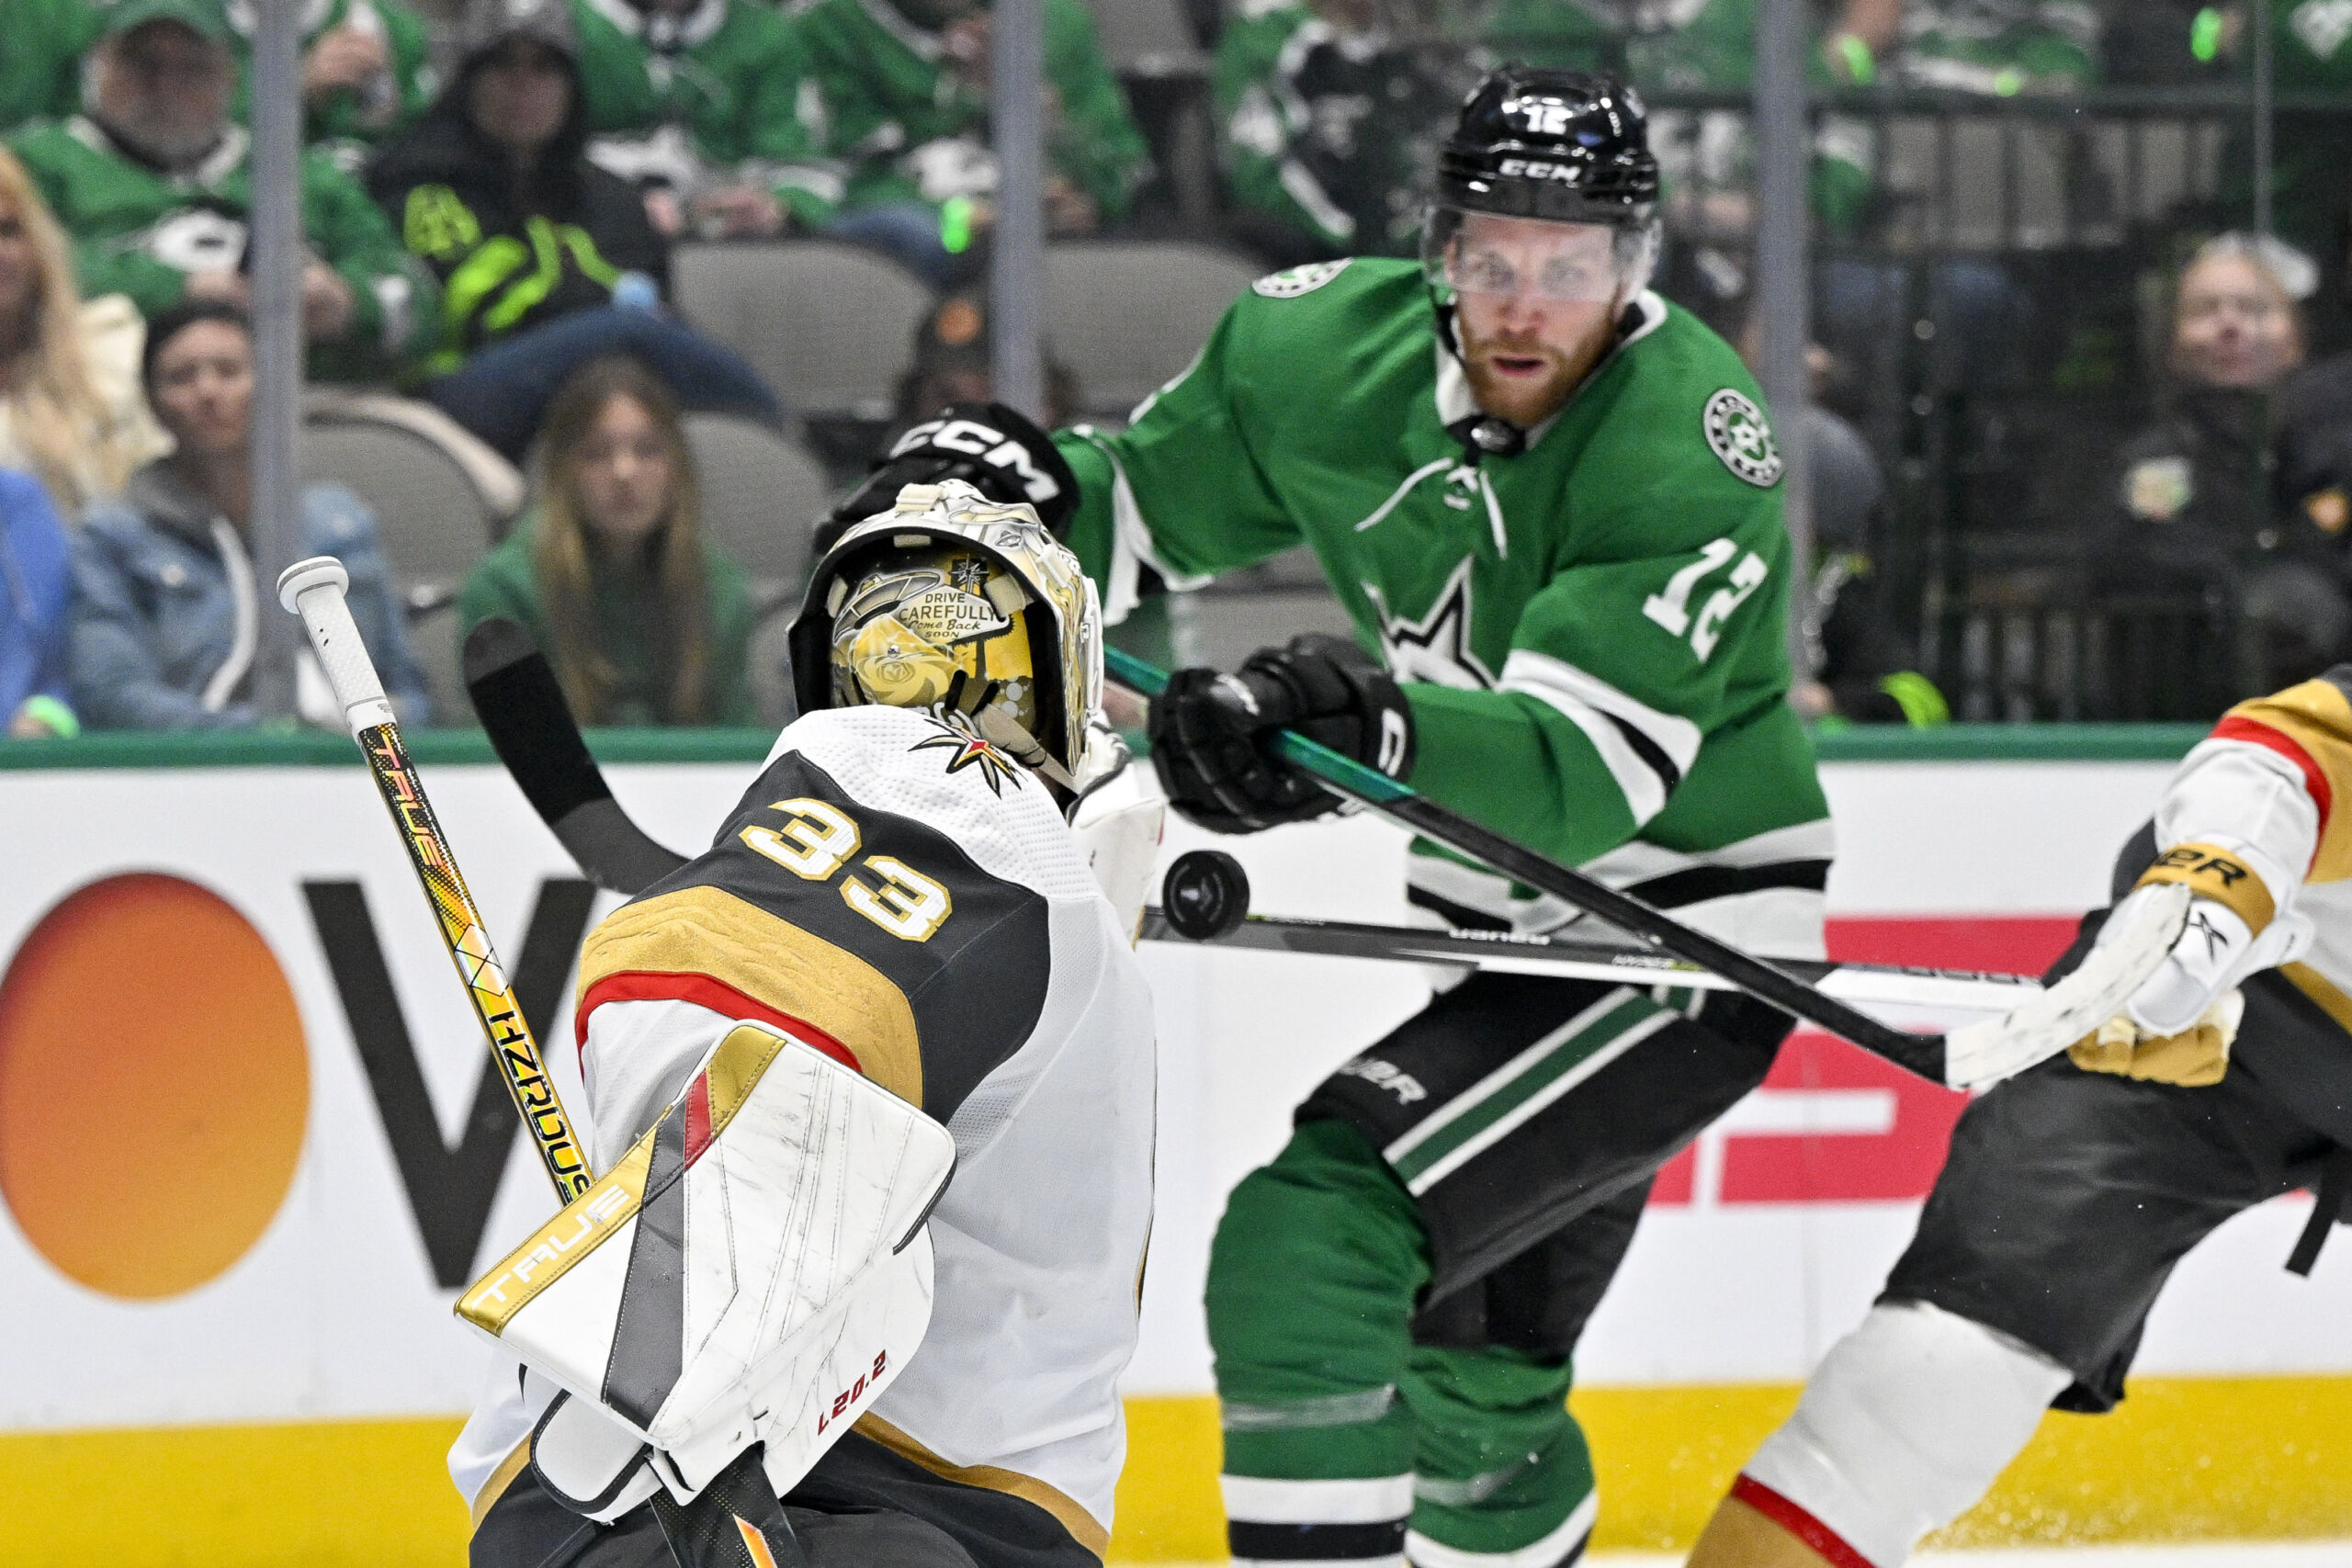 The Dallas Stars season is on the line tonight as the Stars enter Game 4